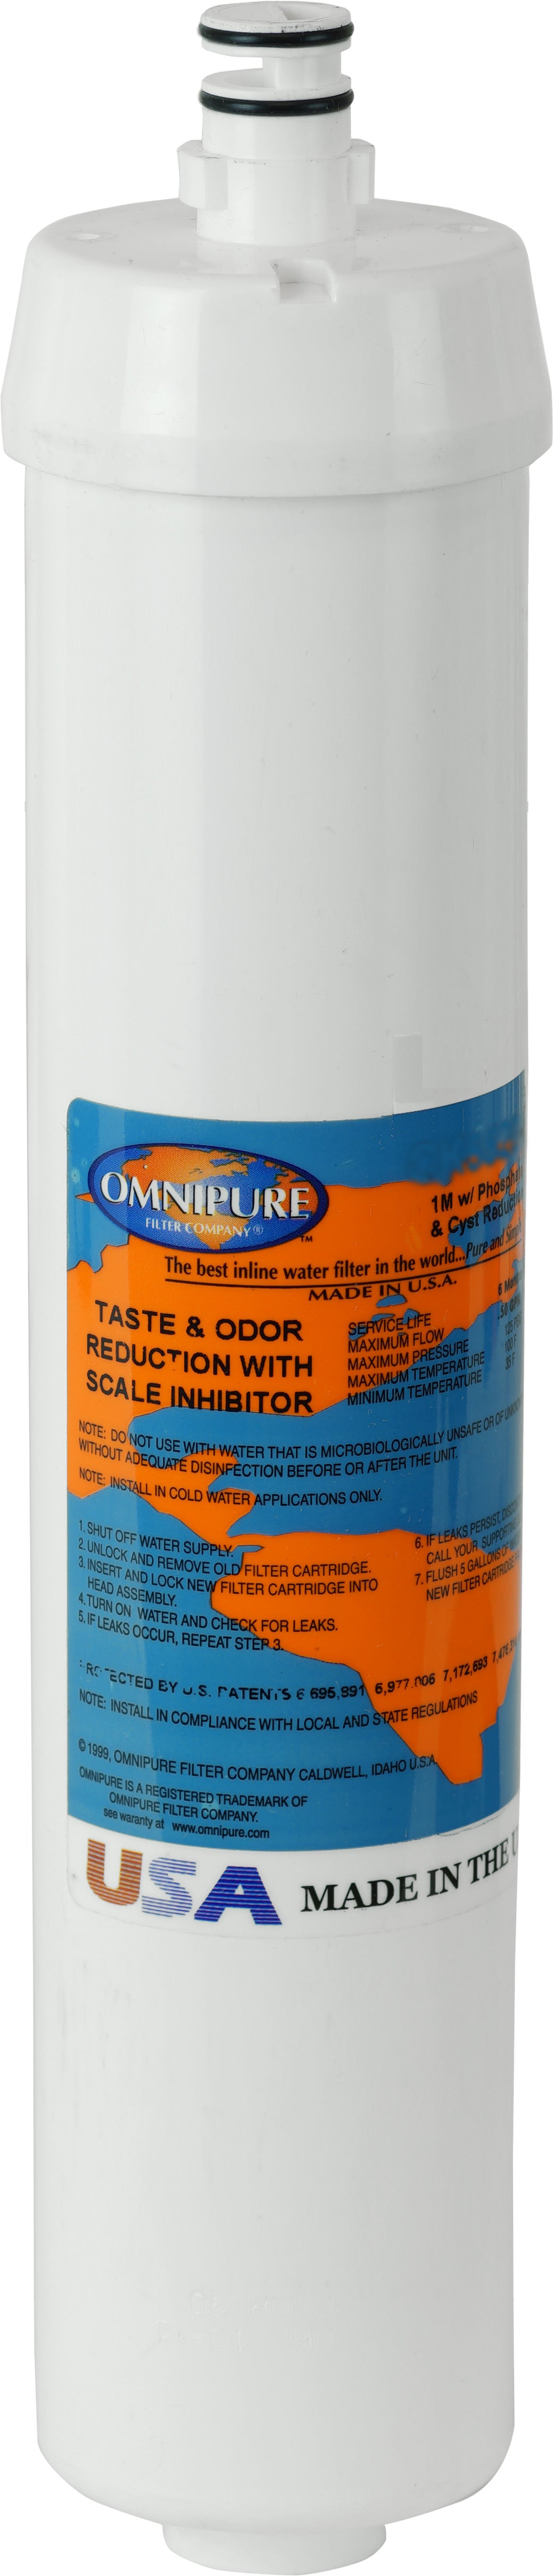 OMNIPURE BLOCK GAC 1 MICRON LEAD REDUCING & SCALE INHIBITOR FILTERS CK-SERIES 2.5 Inch x 14" (CUNO AQUAPURE COMPATIBLE)